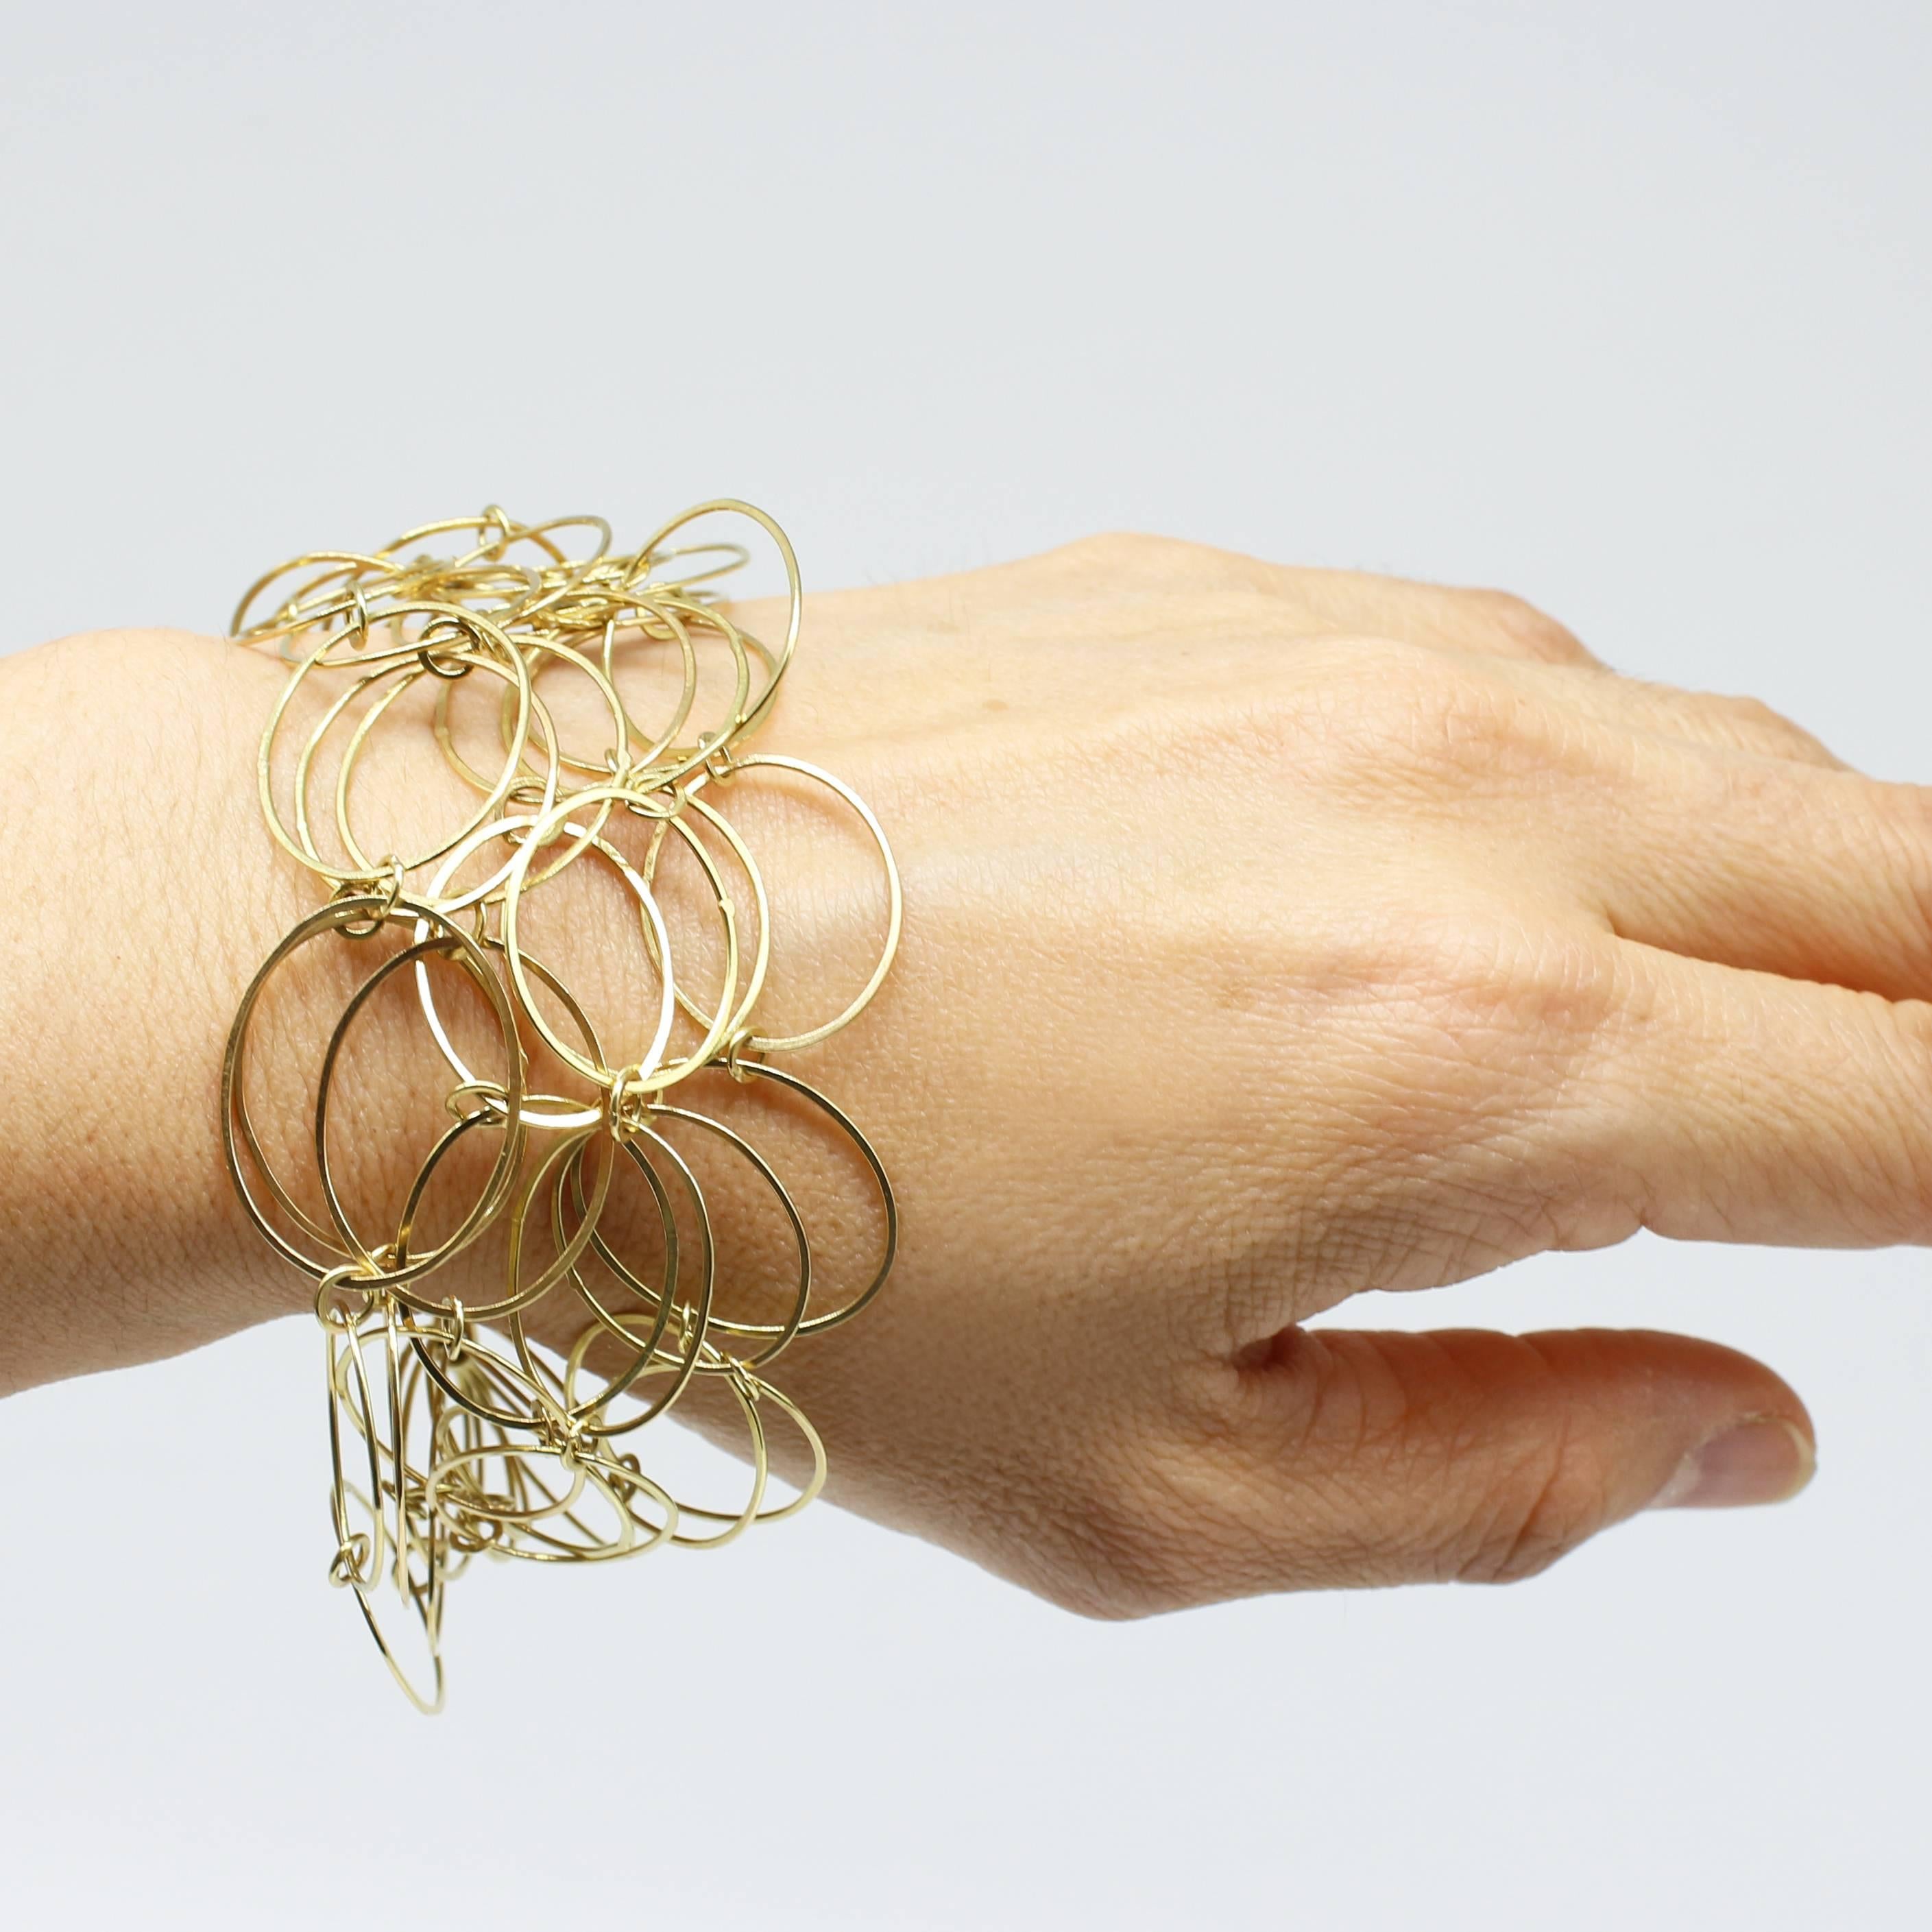 Kayo Saito 18 Karat Gold Chain Flexible Loop Hoop Bracelet Bangle In New Condition For Sale In Canterbury, Kent